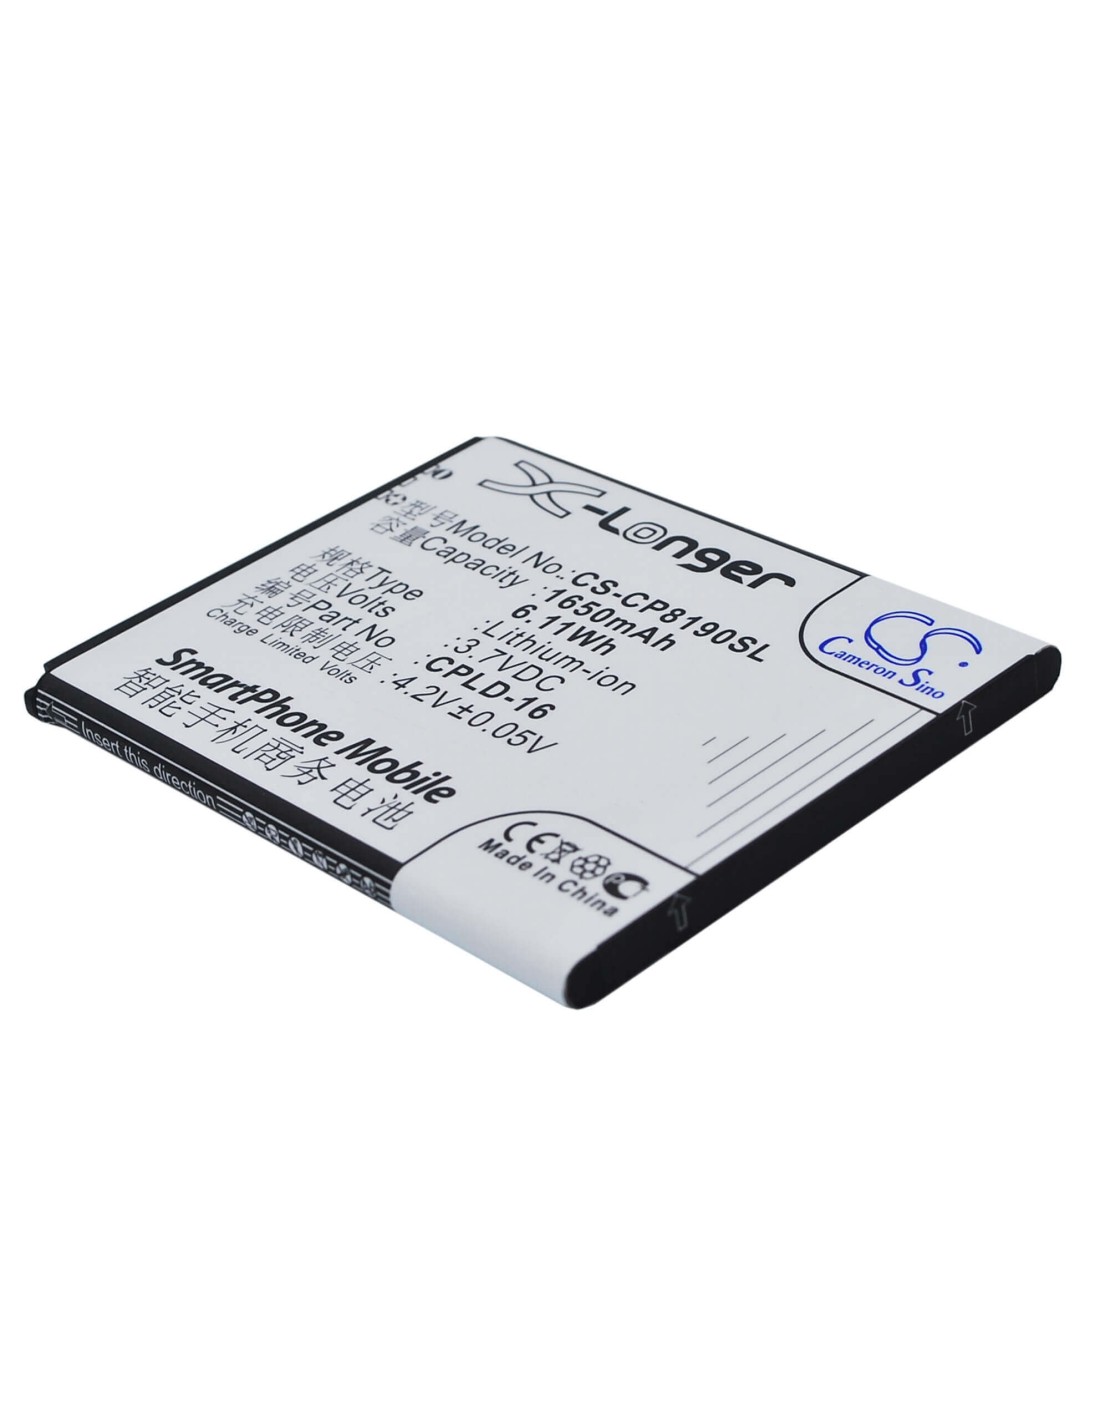 Battery for Coolpad 8190, 8190Q 3.7V, 1650mAh - 6.11Wh